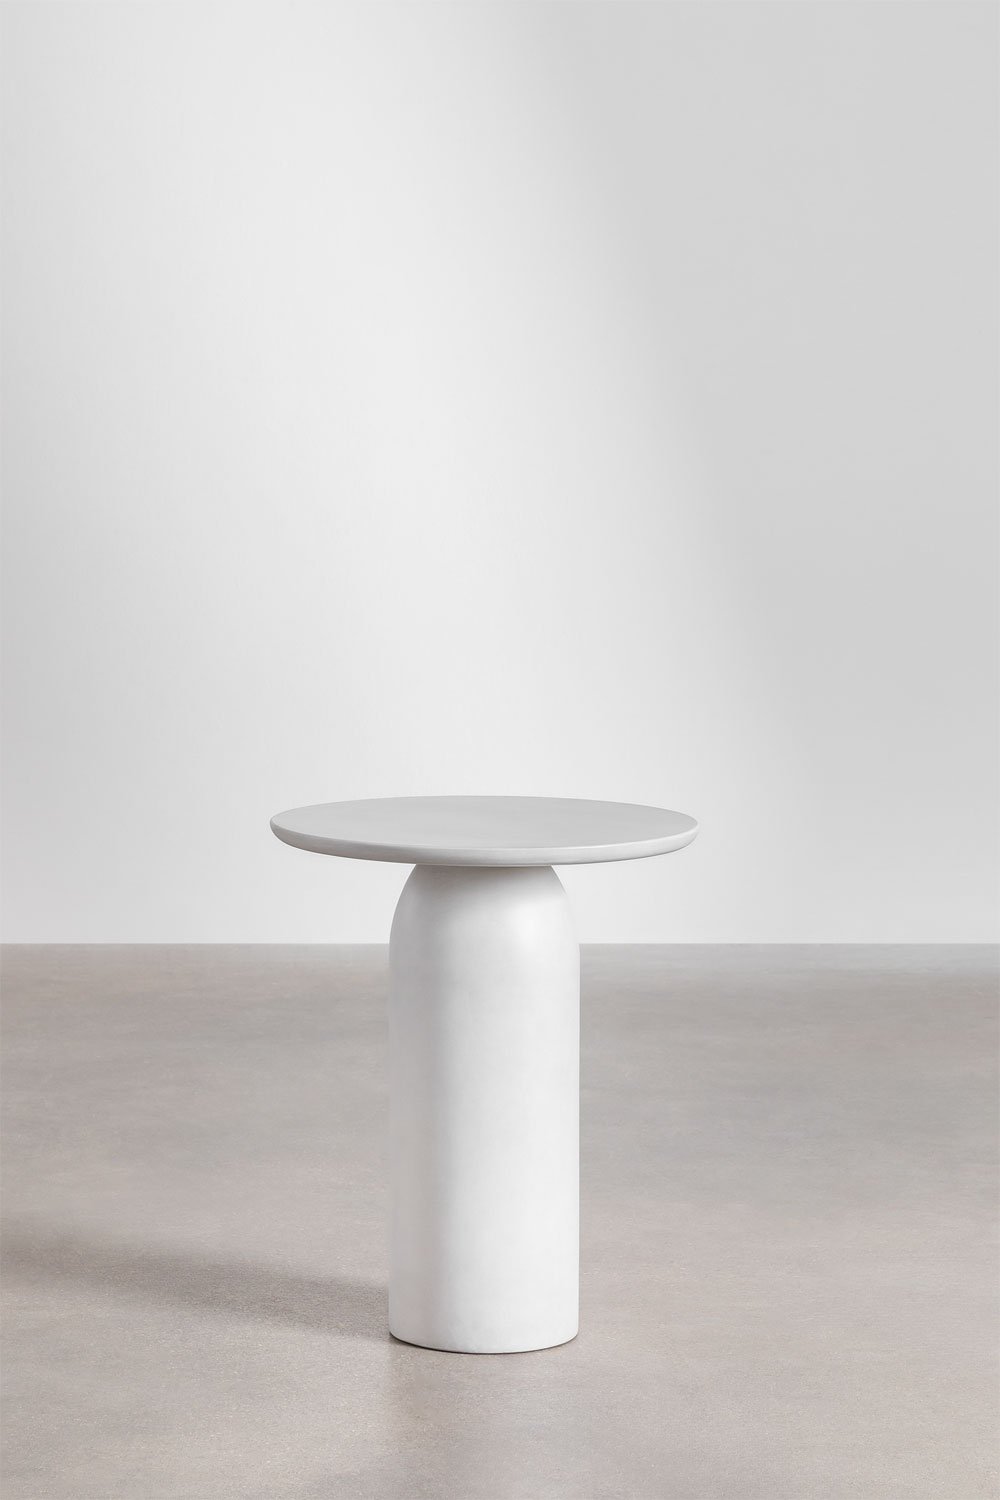 Round Auxiliary Table for Concrete Garden (Ø45 cm) Layana, gallery image 2